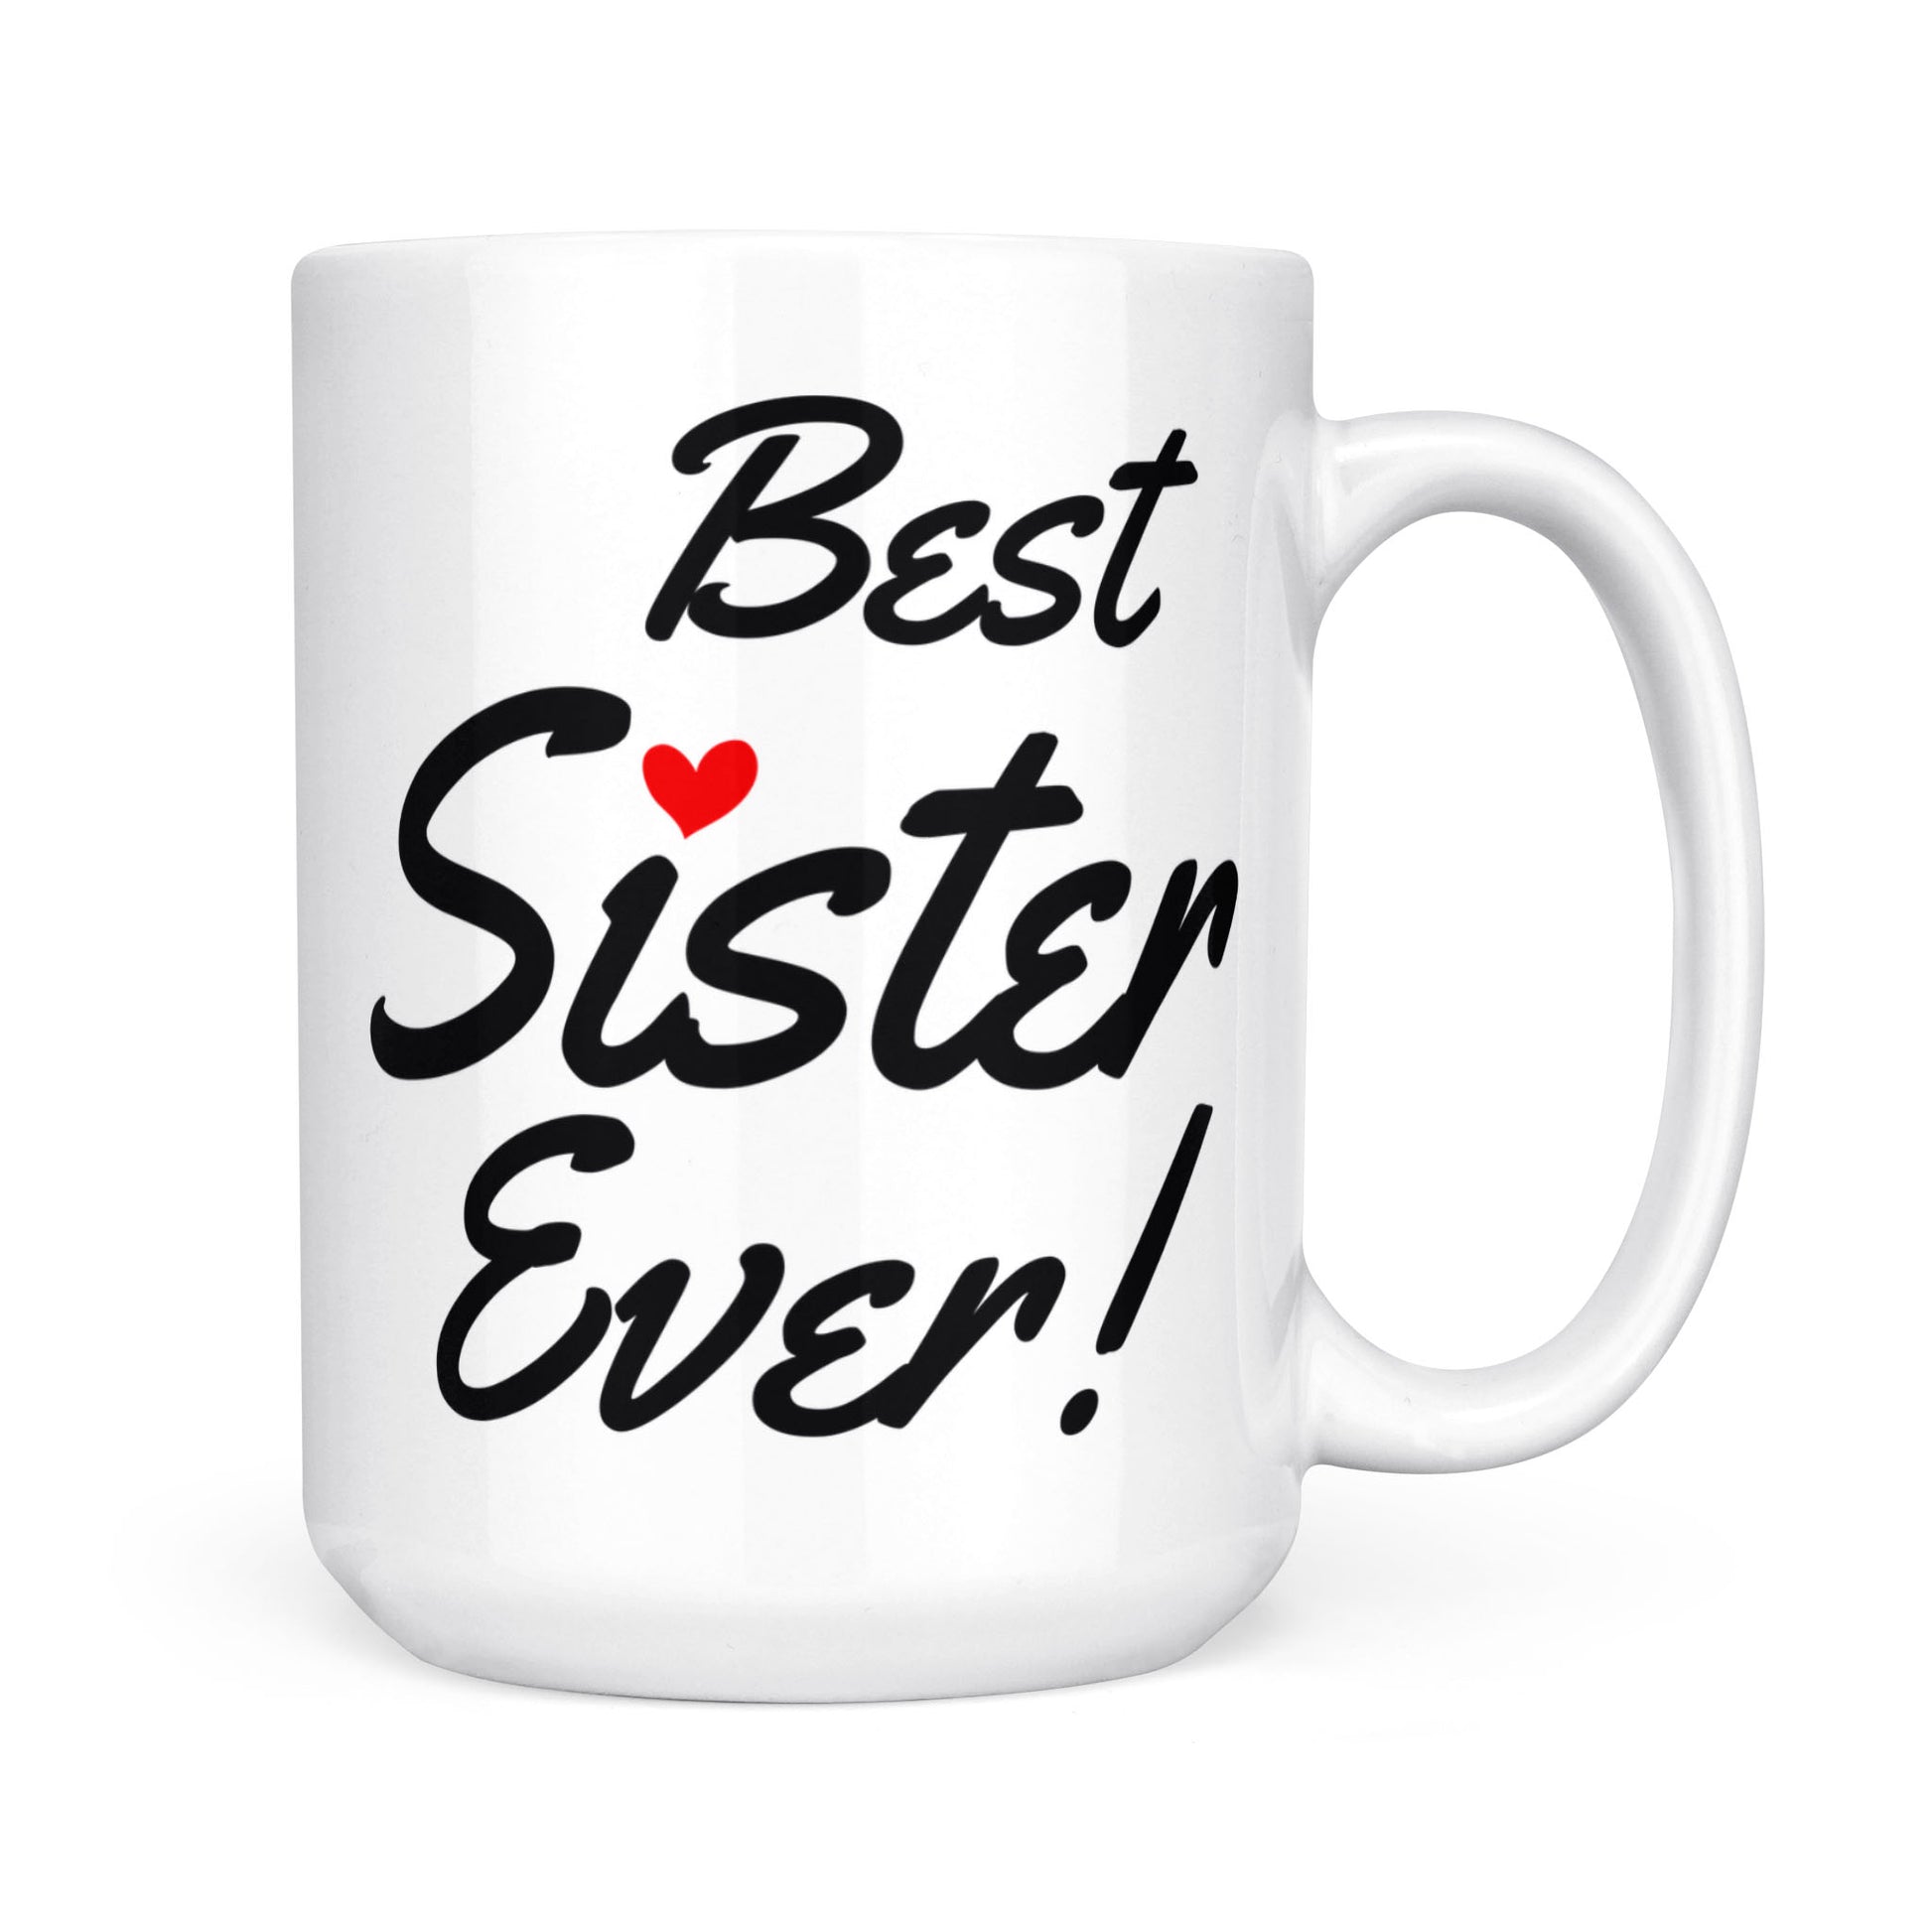 Best Sister Ever Mug, Coffee Cup for Sis